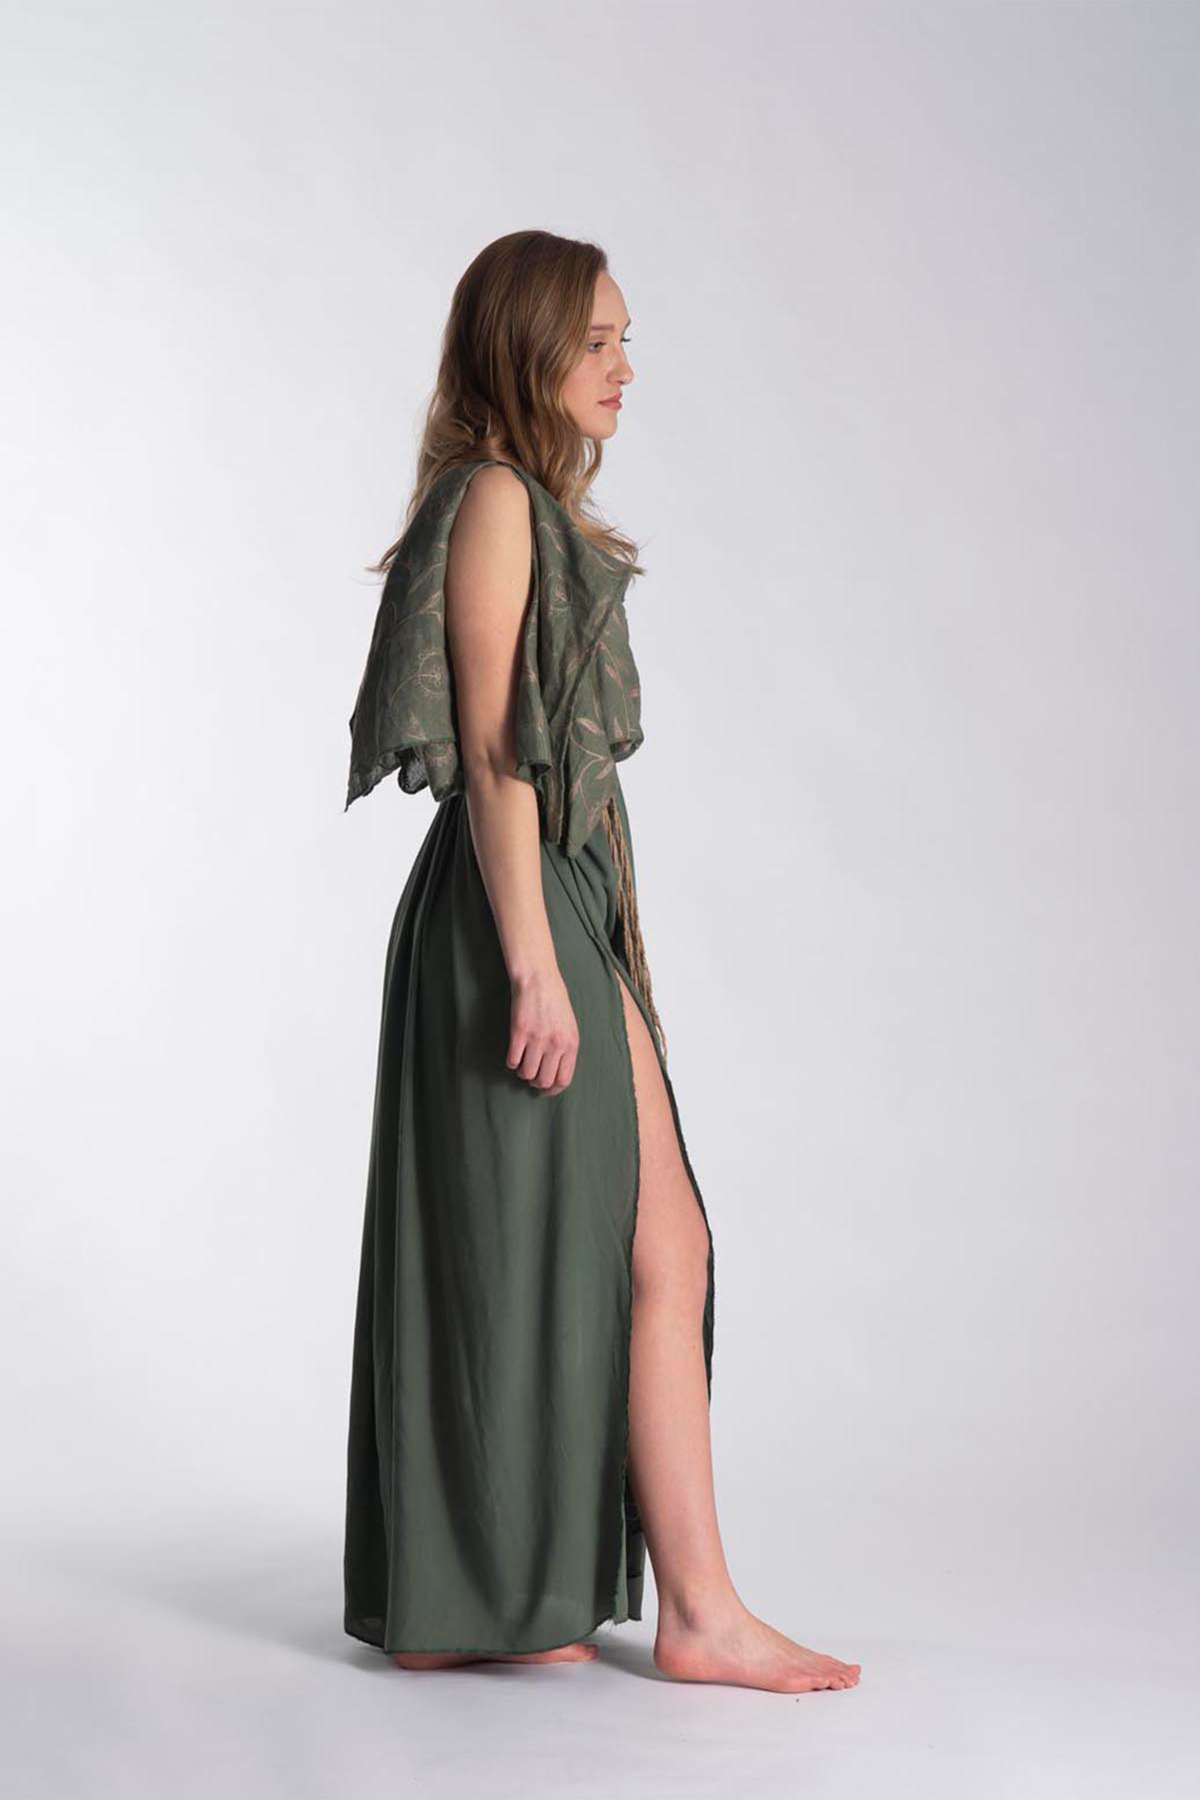 Greek inspired green dress with linen top and rayon blend bottom